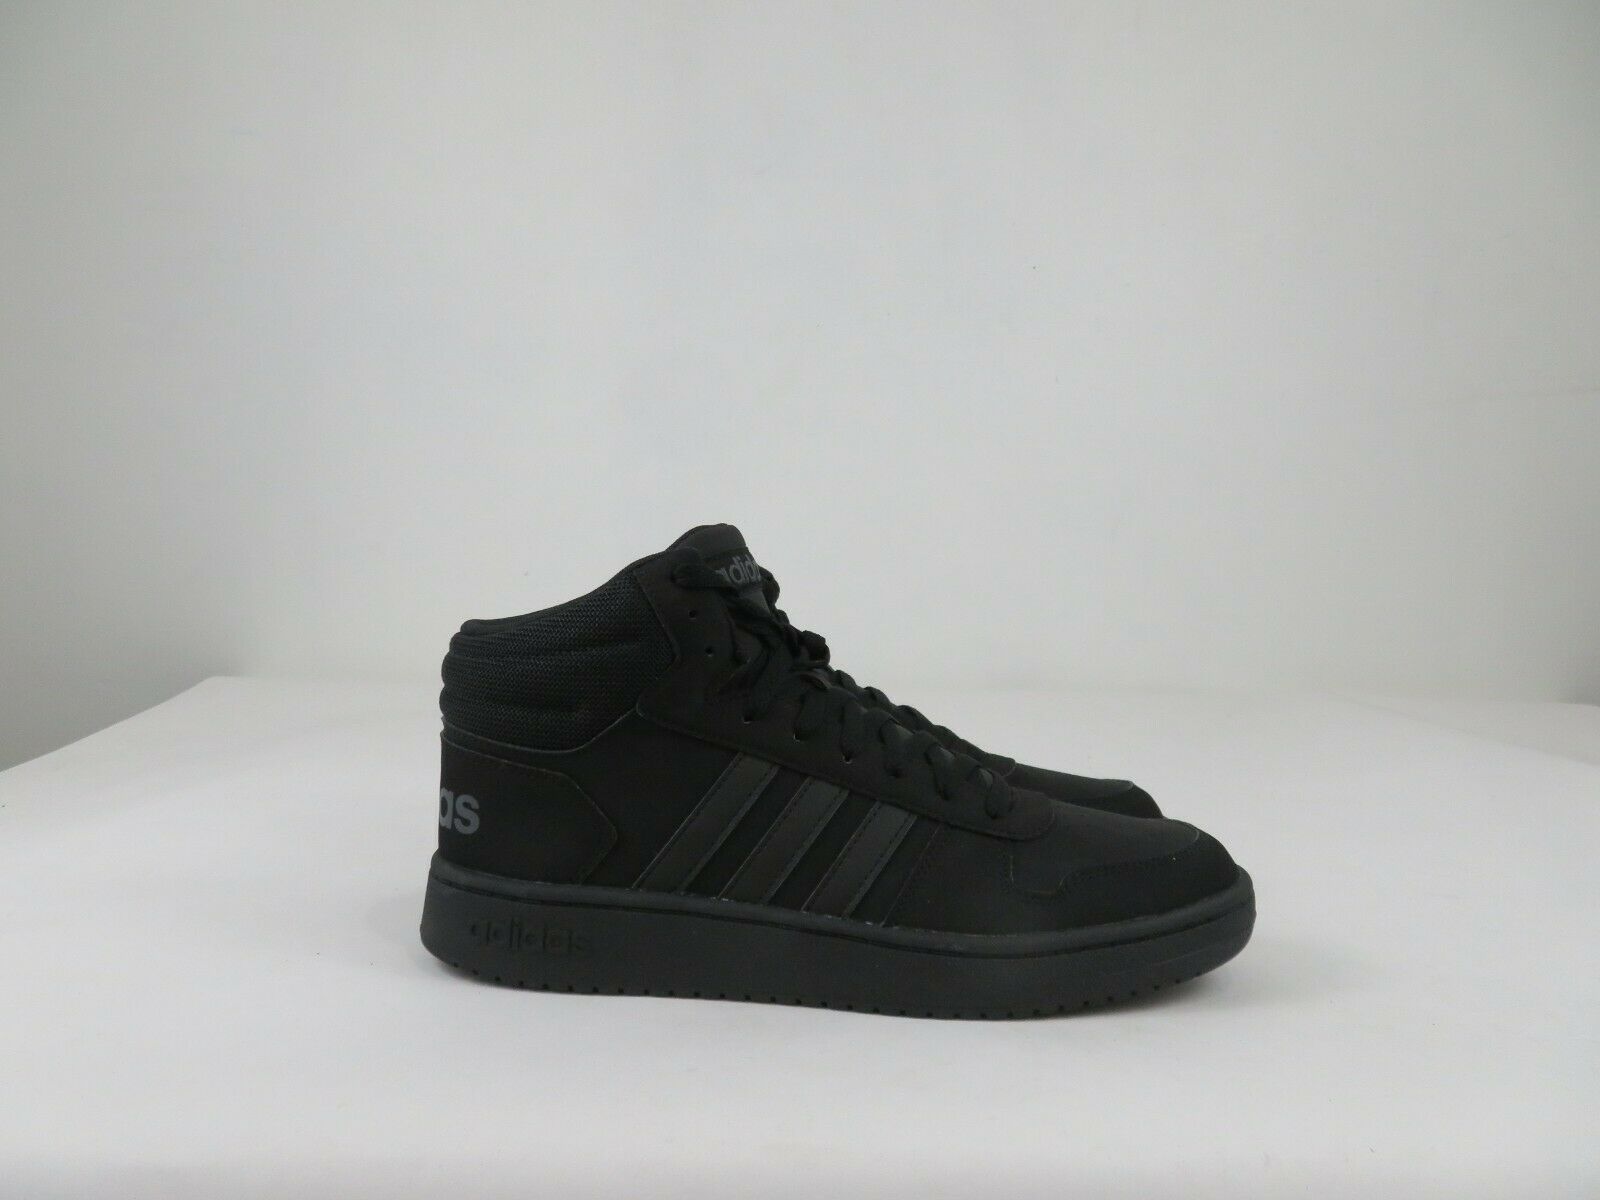 Adidas Hoops 2.0 Mid Shoes Mens 10.5 Black Leather Athletic Basketball Lace Up